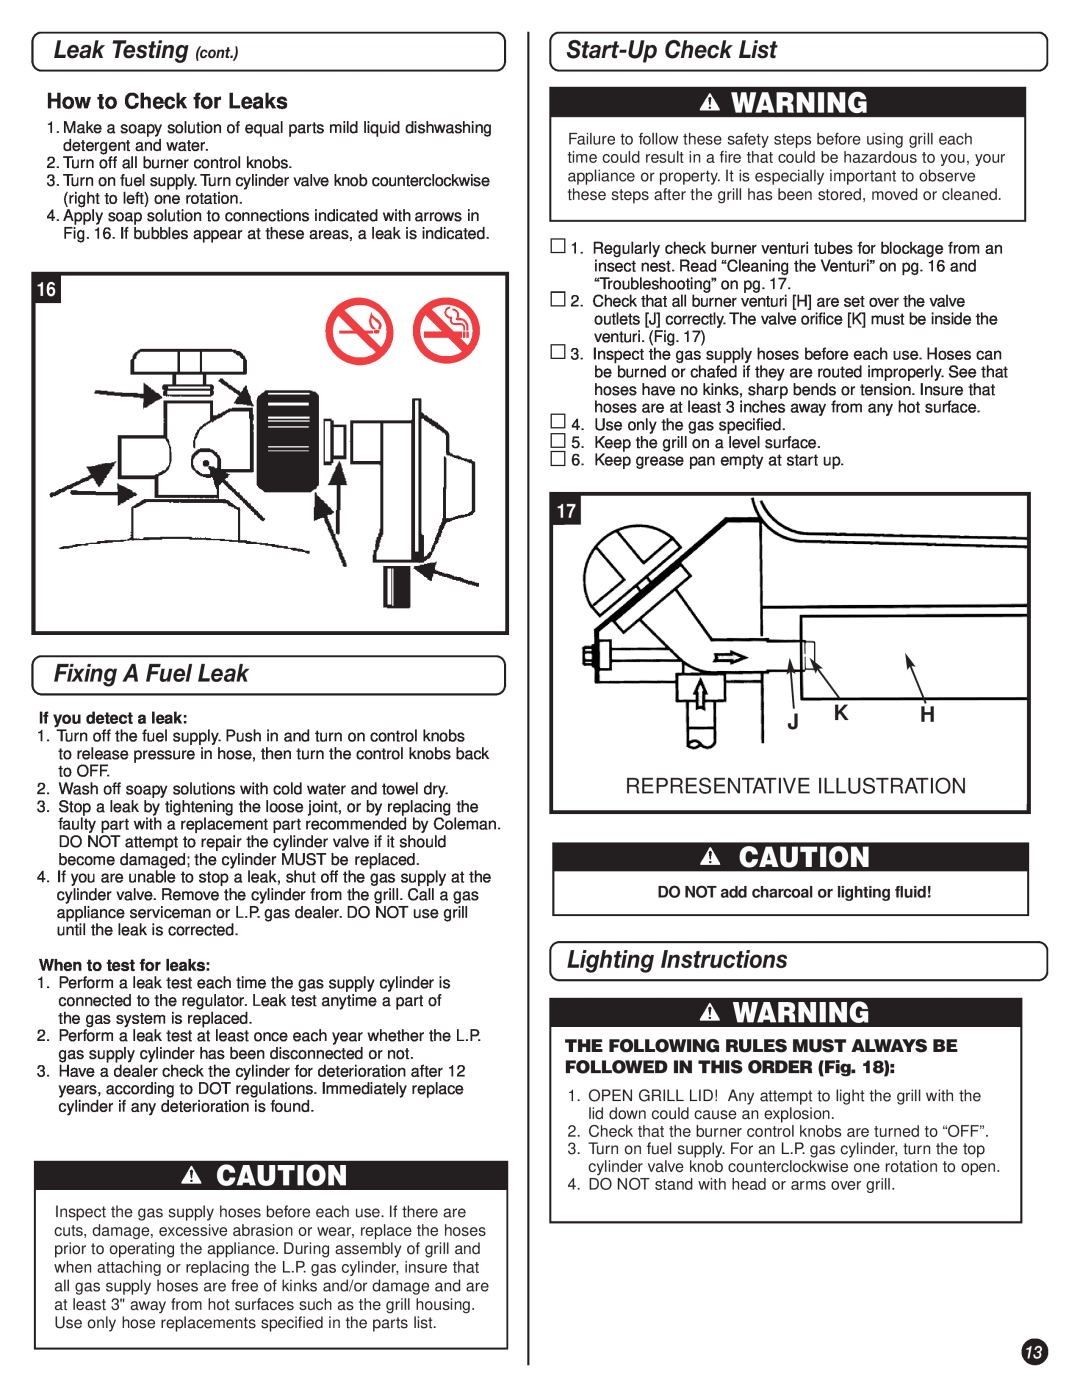 Coleman 9947A726 Leak Testing cont, Fixing A Fuel Leak, Start-Up Check List, Lighting Instructions, How to Check for Leaks 